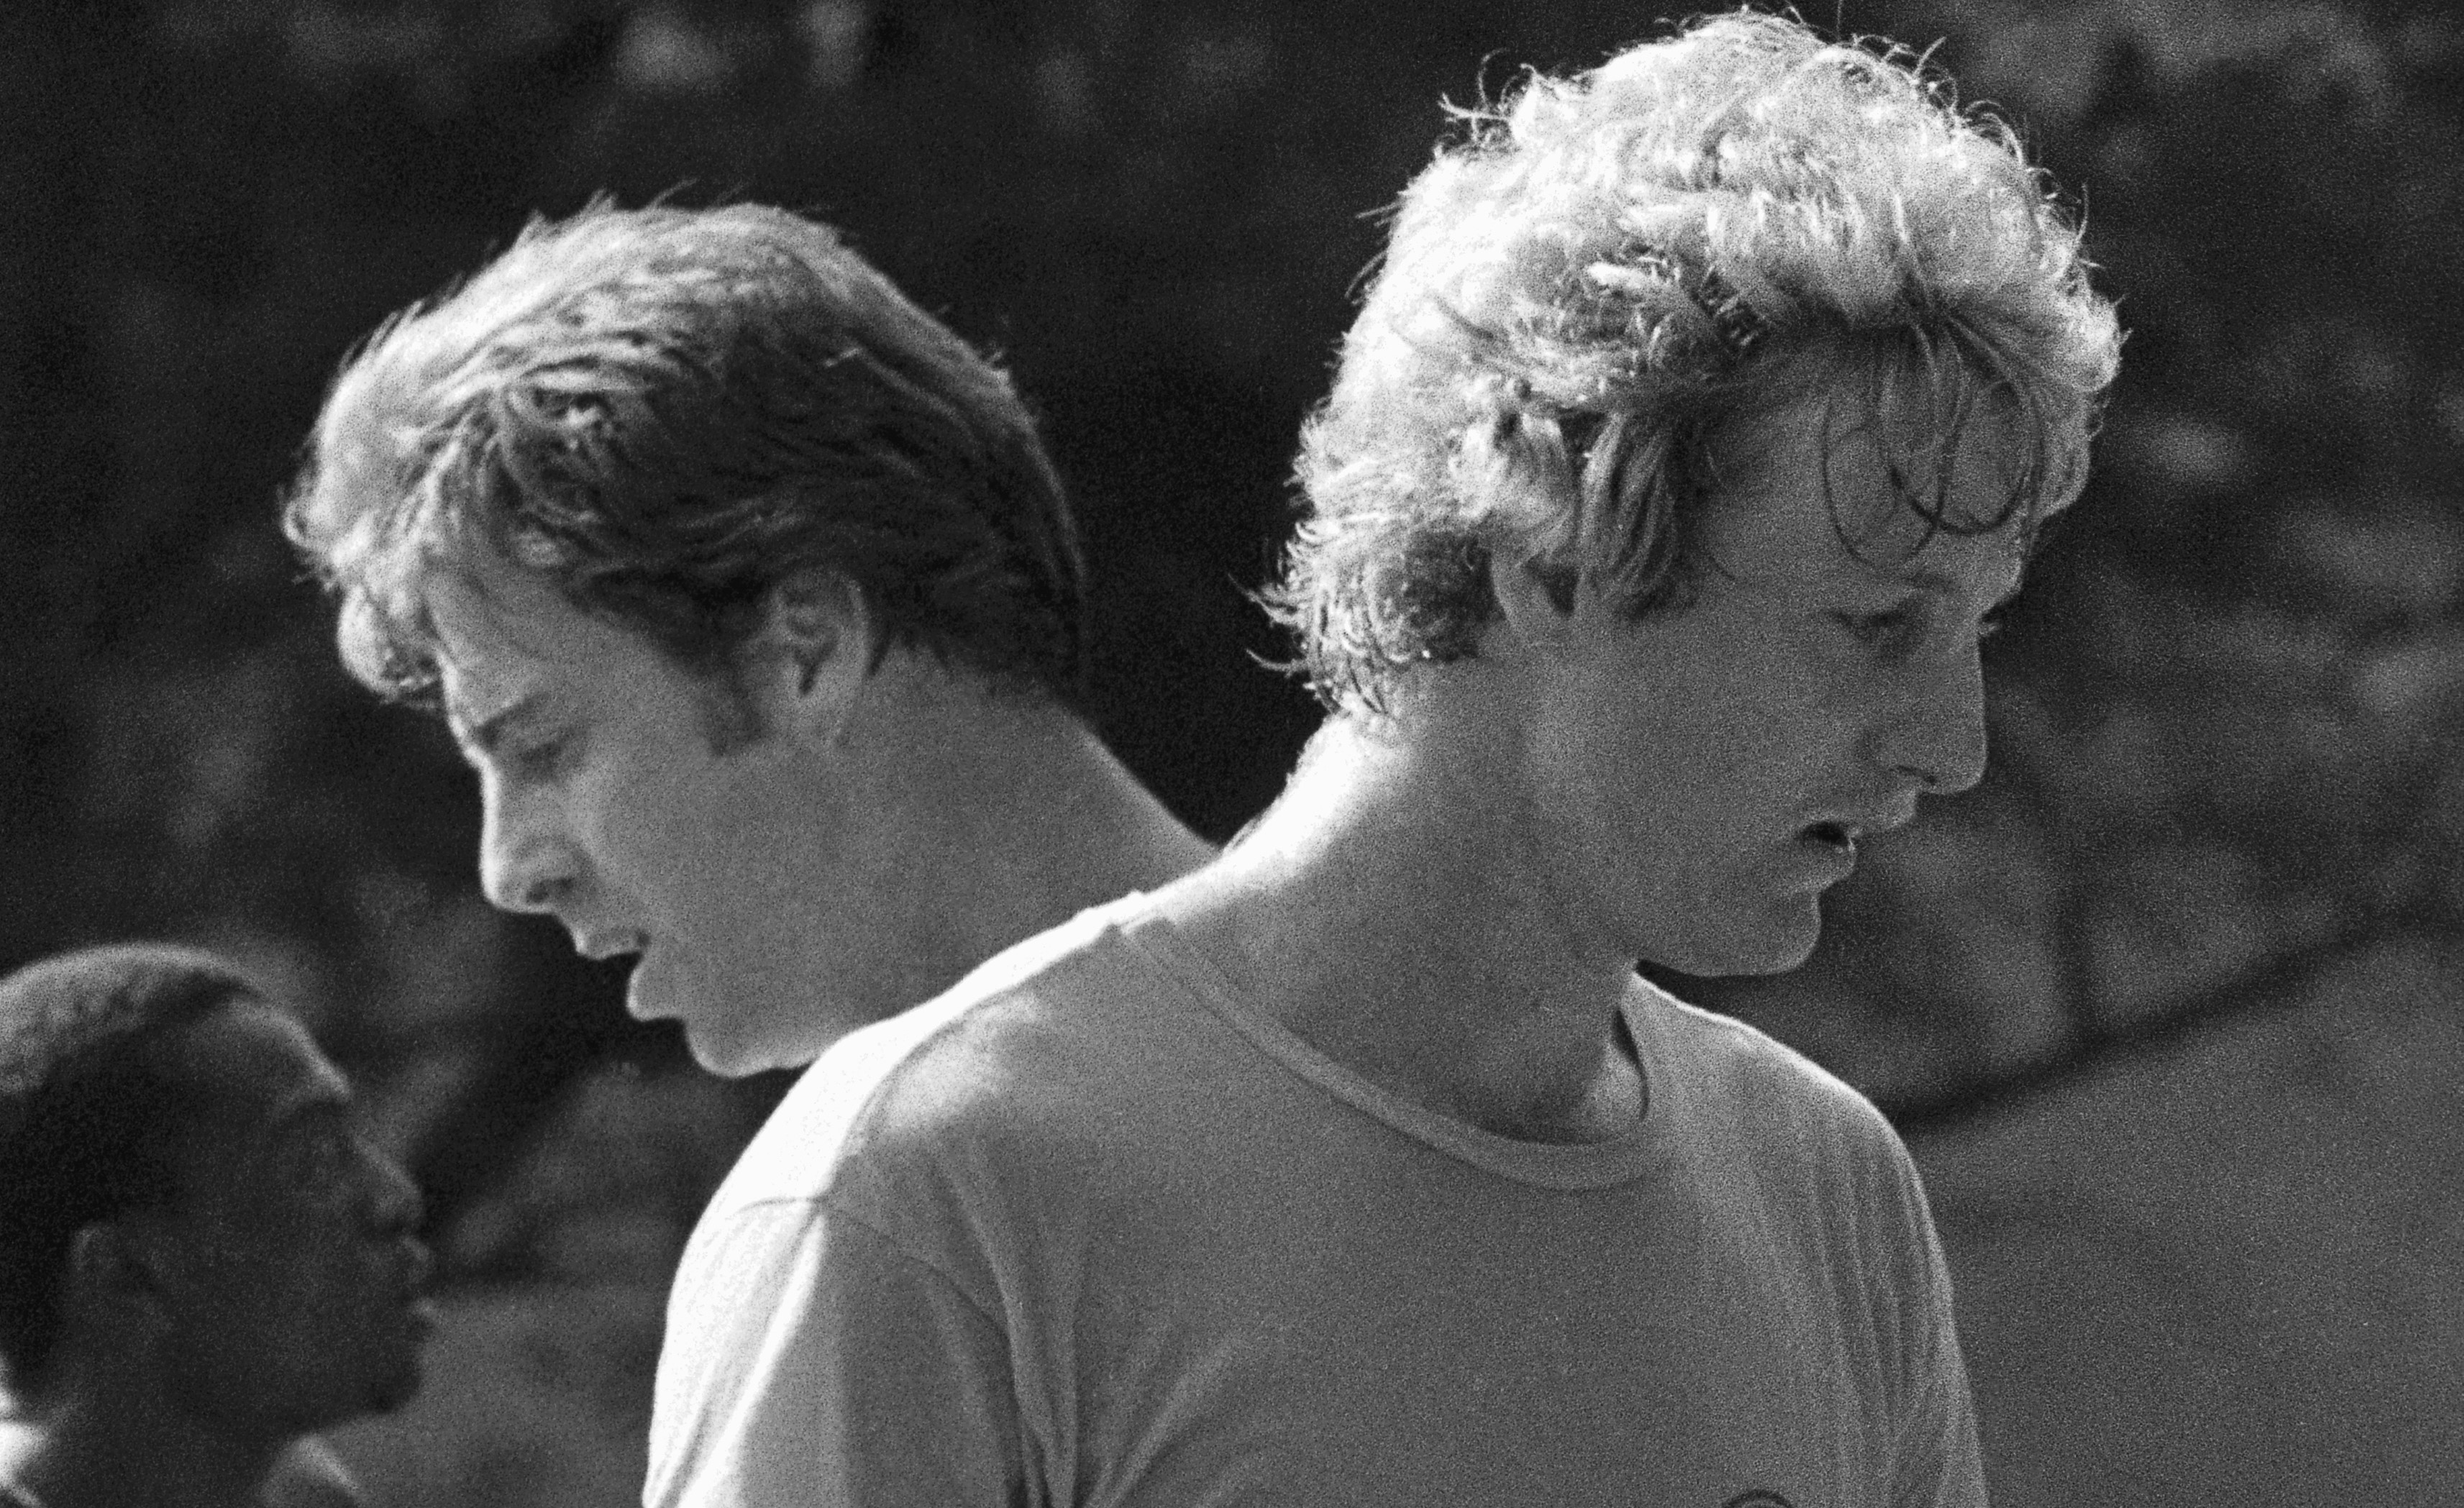 Boston Celtics star rookie Larry Bird and the club's veteran center Dave Cowens go over some plays.